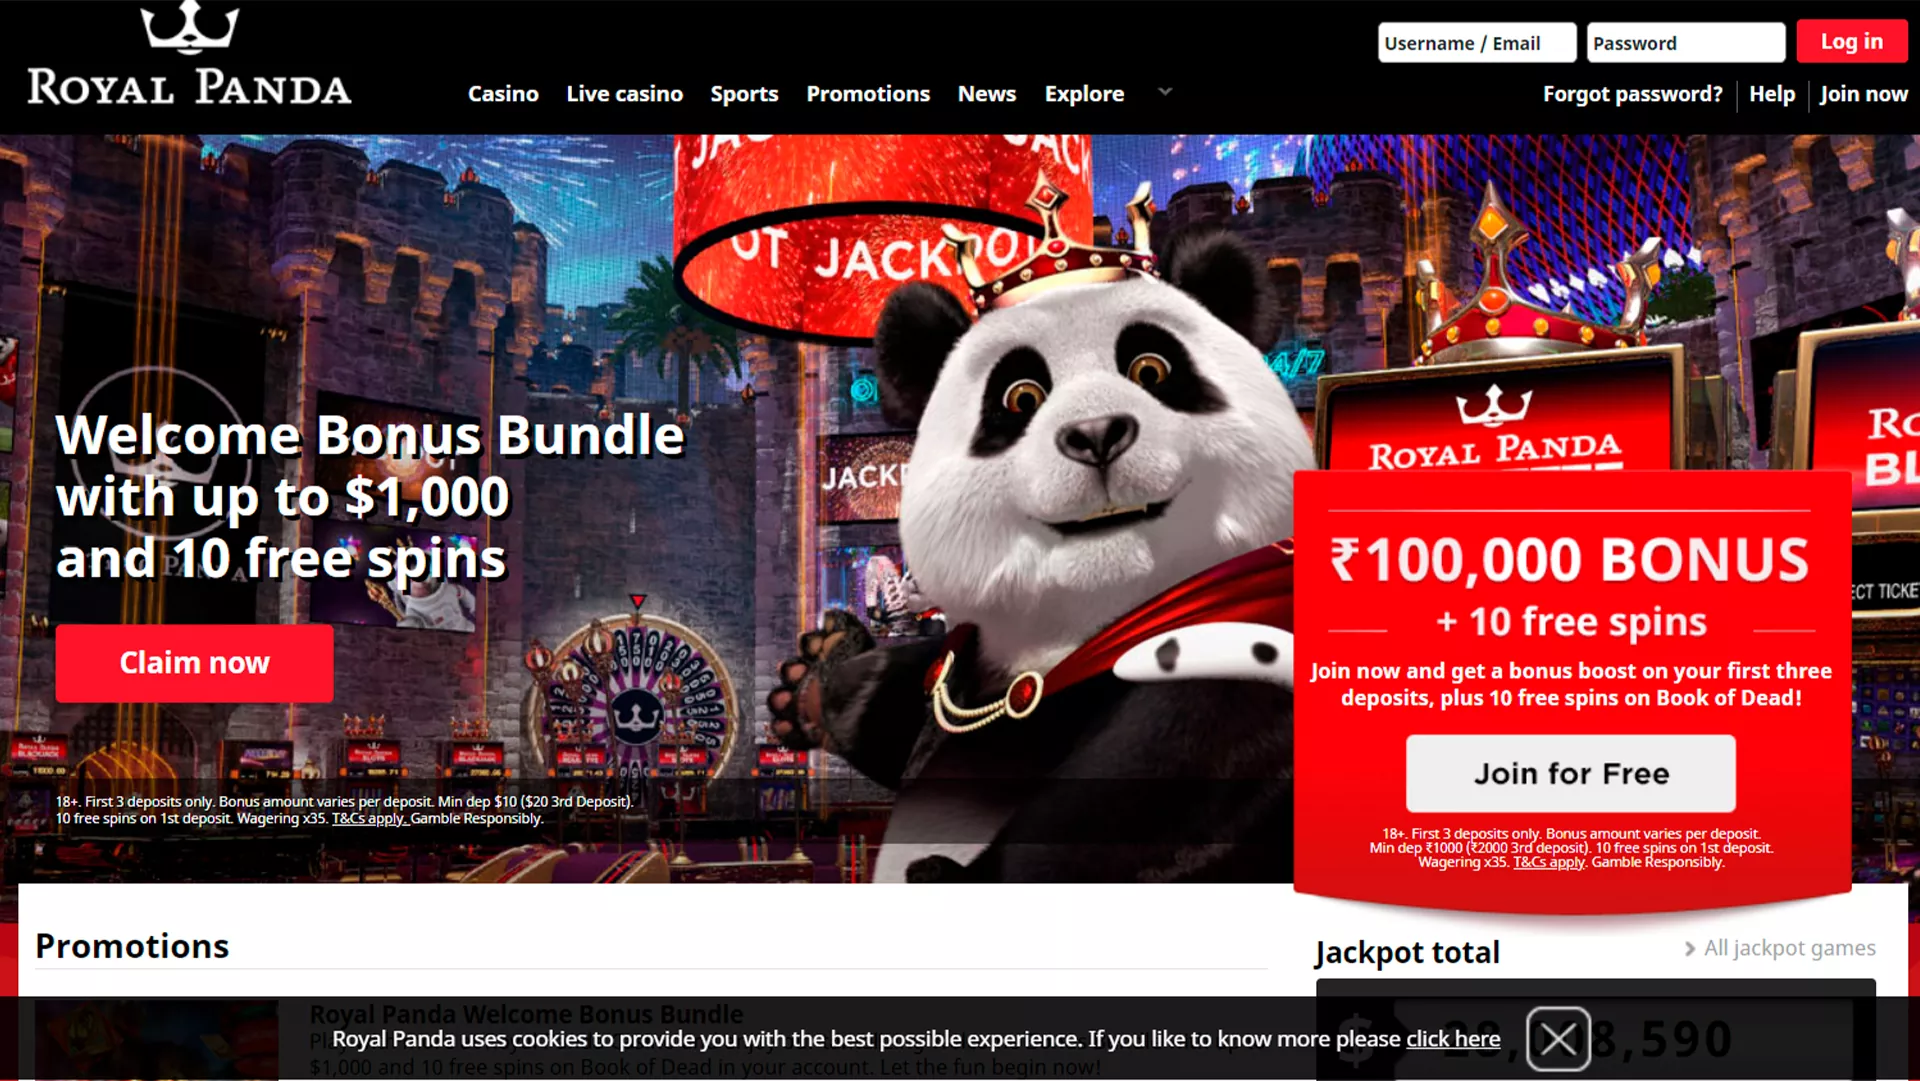 You will see a colorful home page of Royal Panda betting platform.